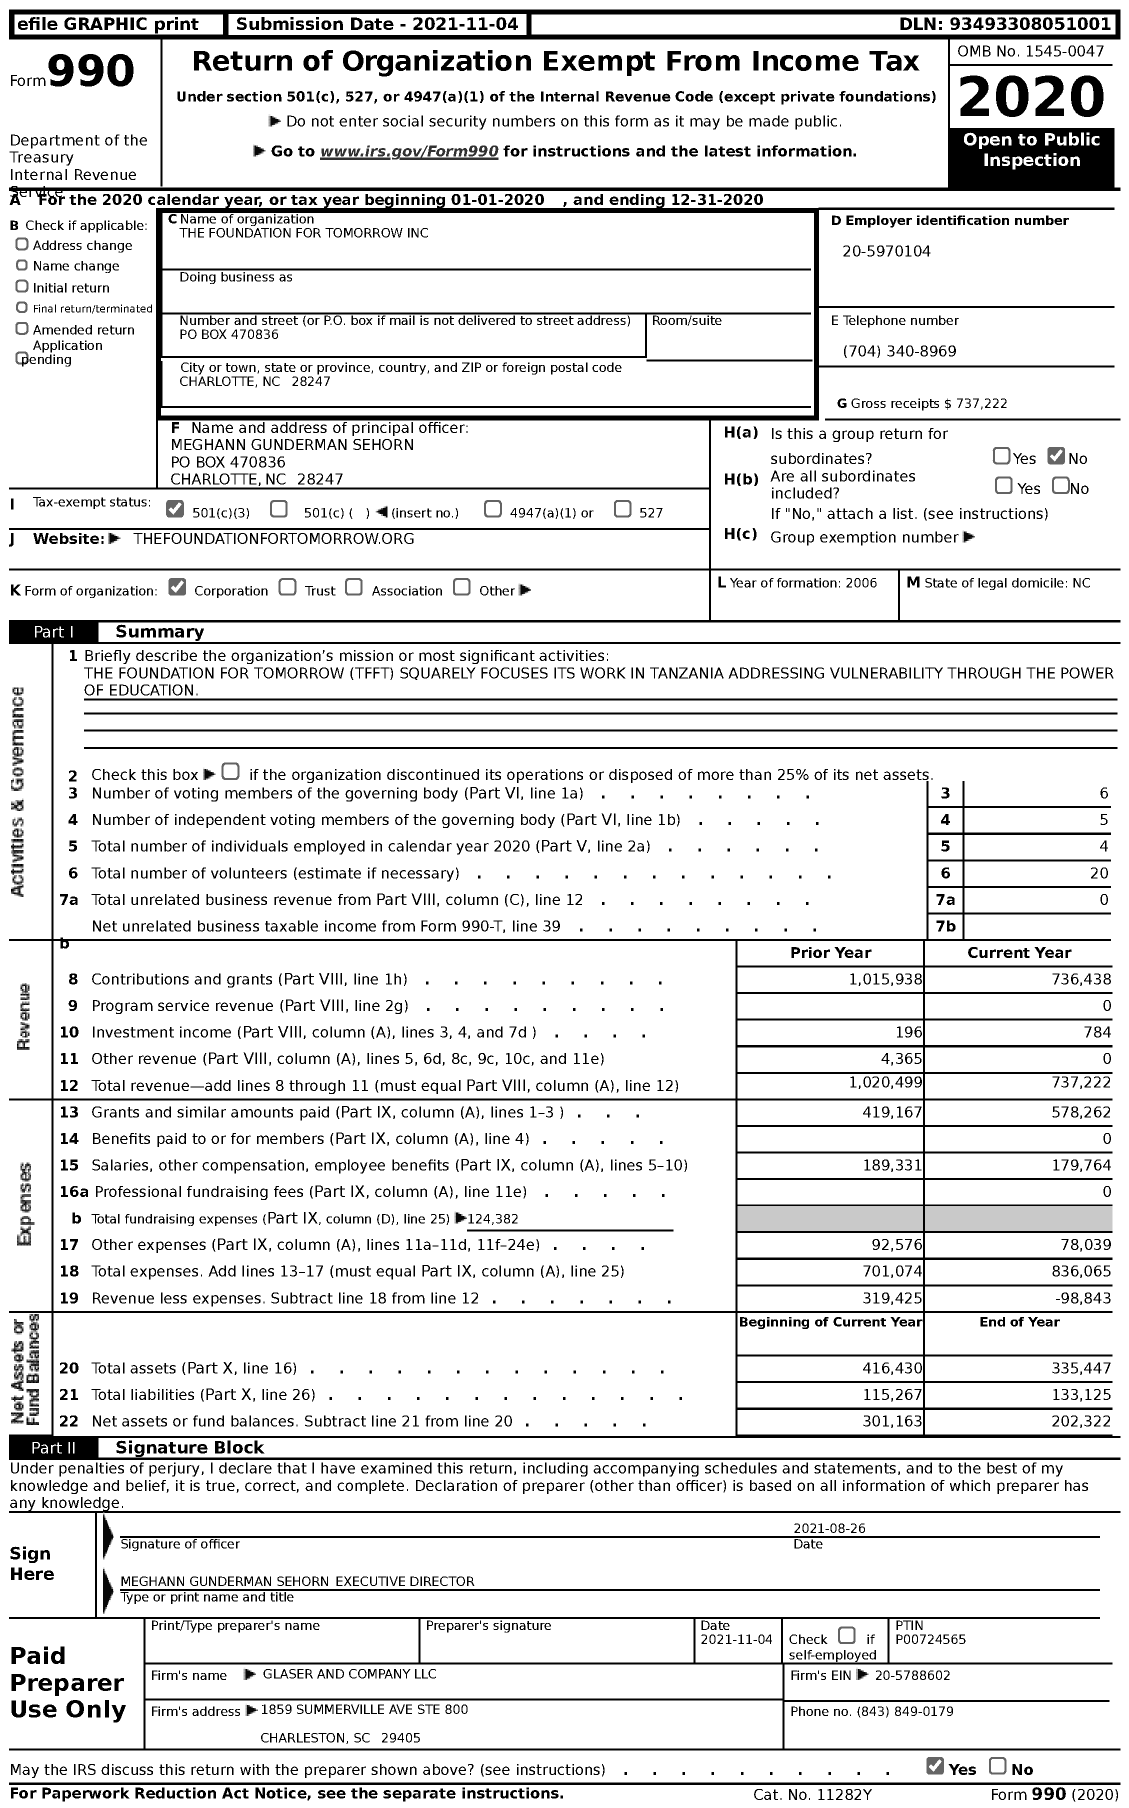 Image of first page of 2020 Form 990 for The Foundation for Tomorrow